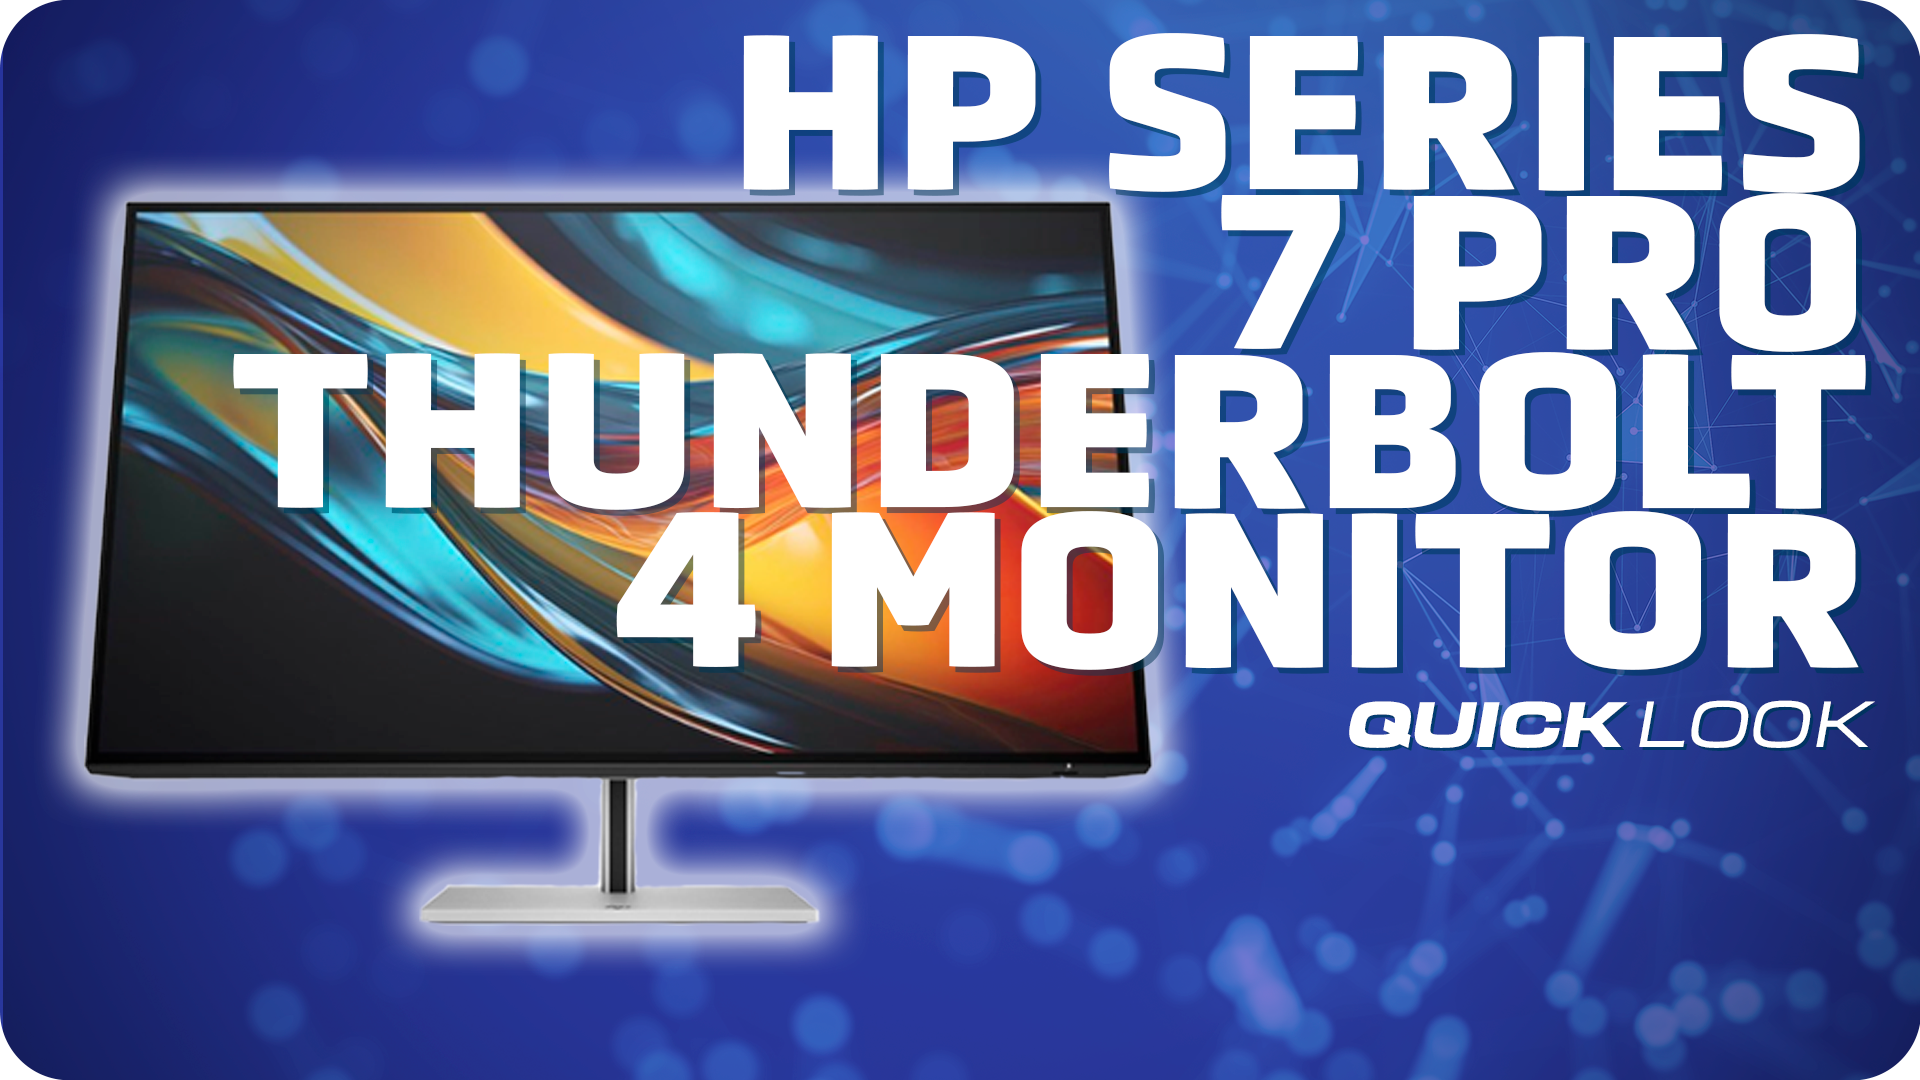 HP Series 7 Pro monitor hopes to rival reality with its colors –